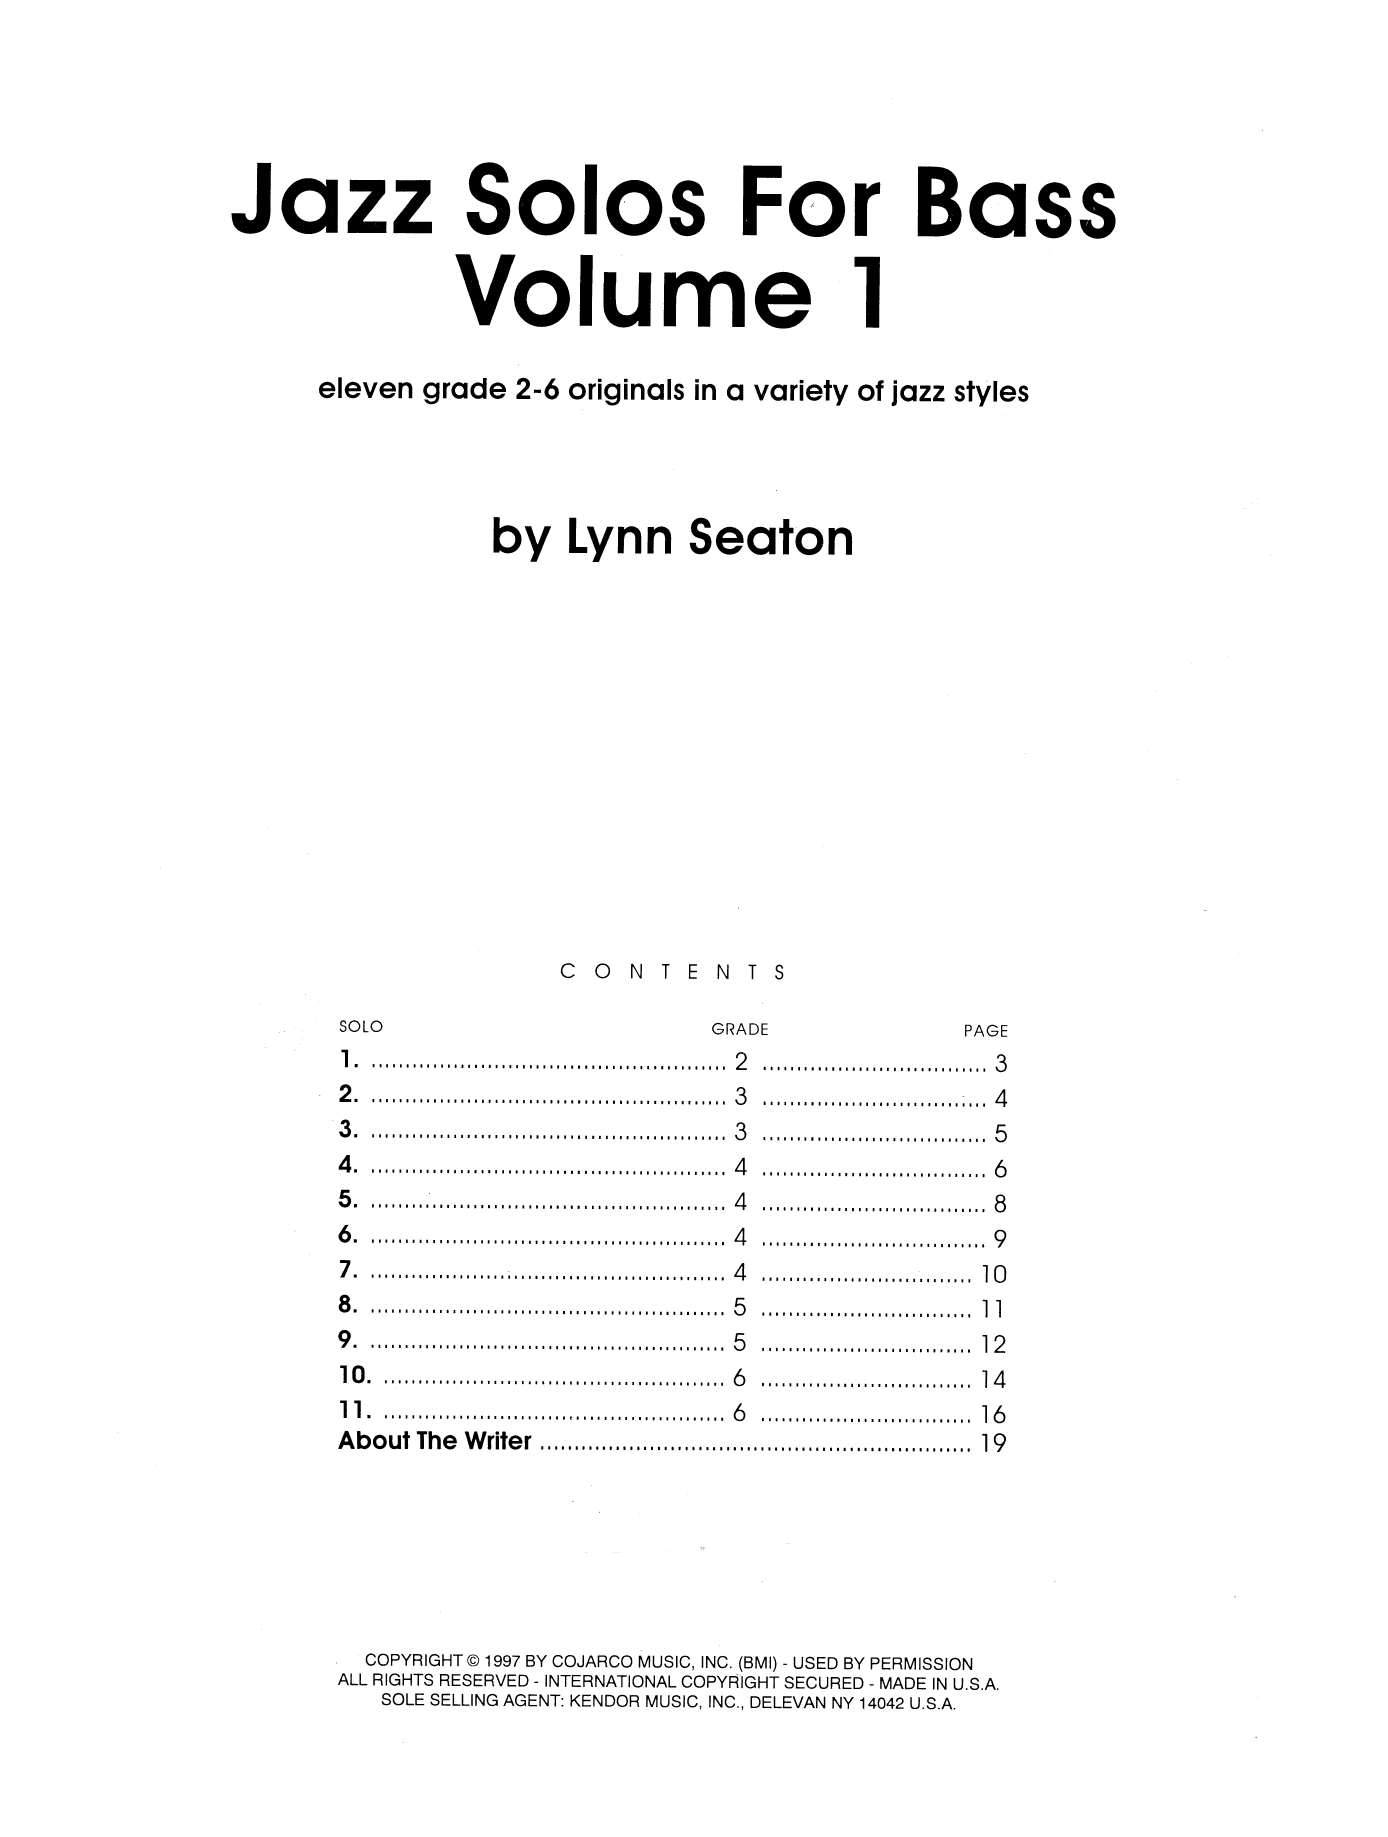 Lynn Seaton Jazz Solos For Bass, Volume 1 sheet music preview music notes and score for Percussion Solo including 18 page(s)